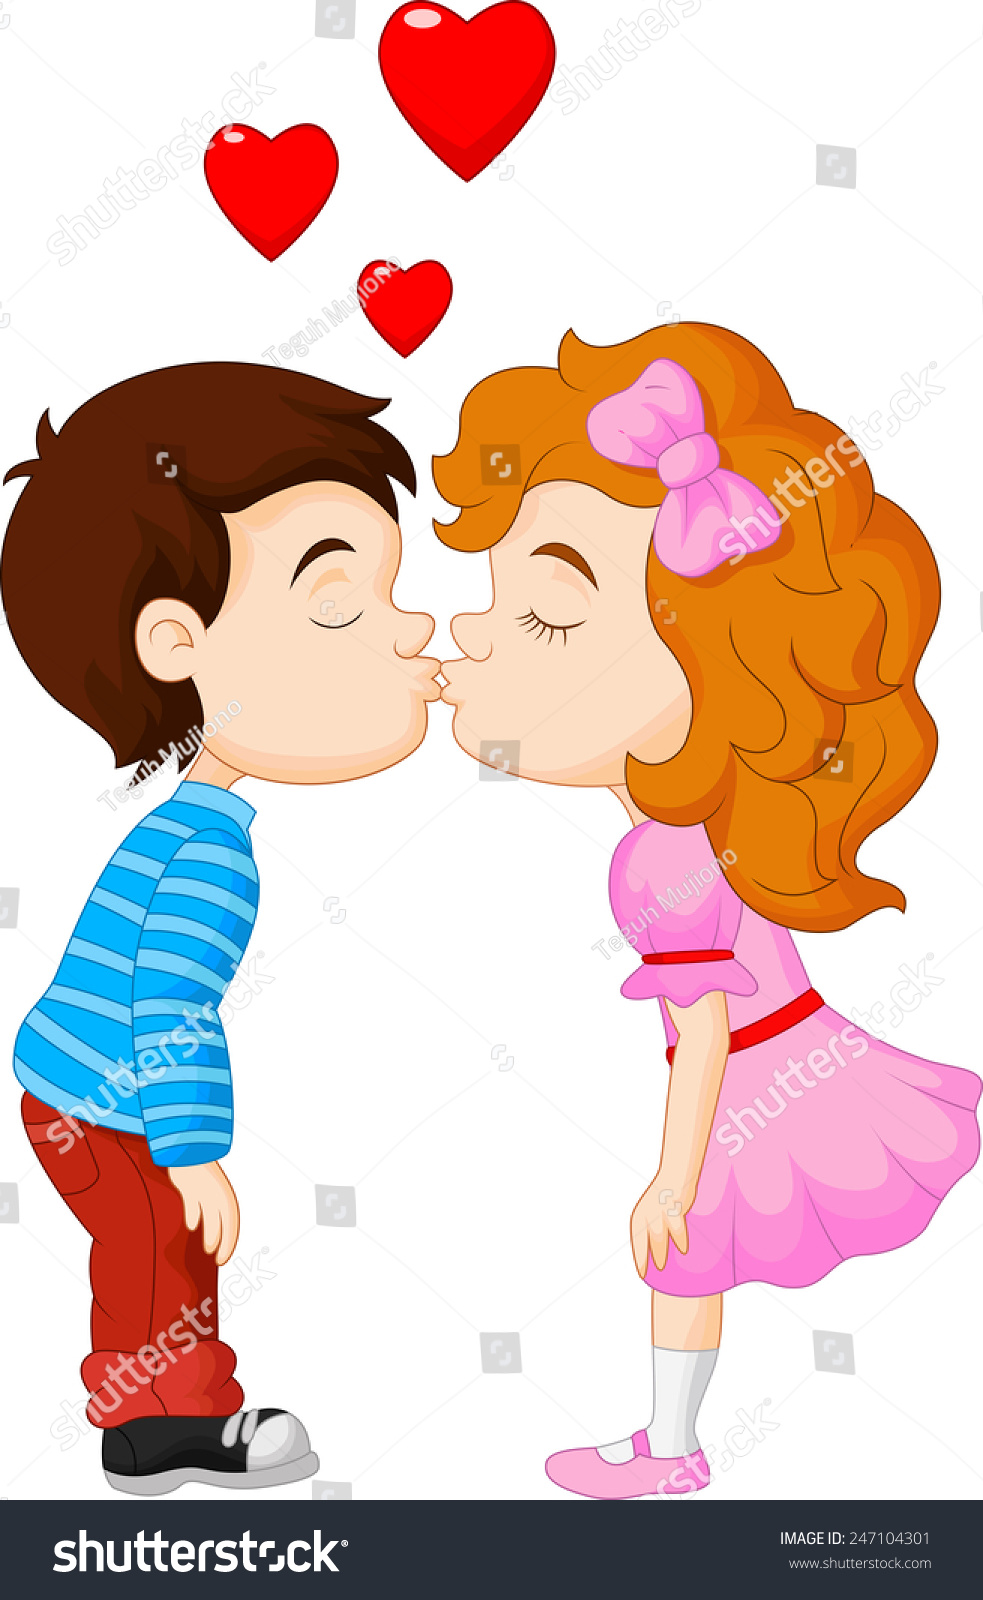 Best of Girl and boy kissing images